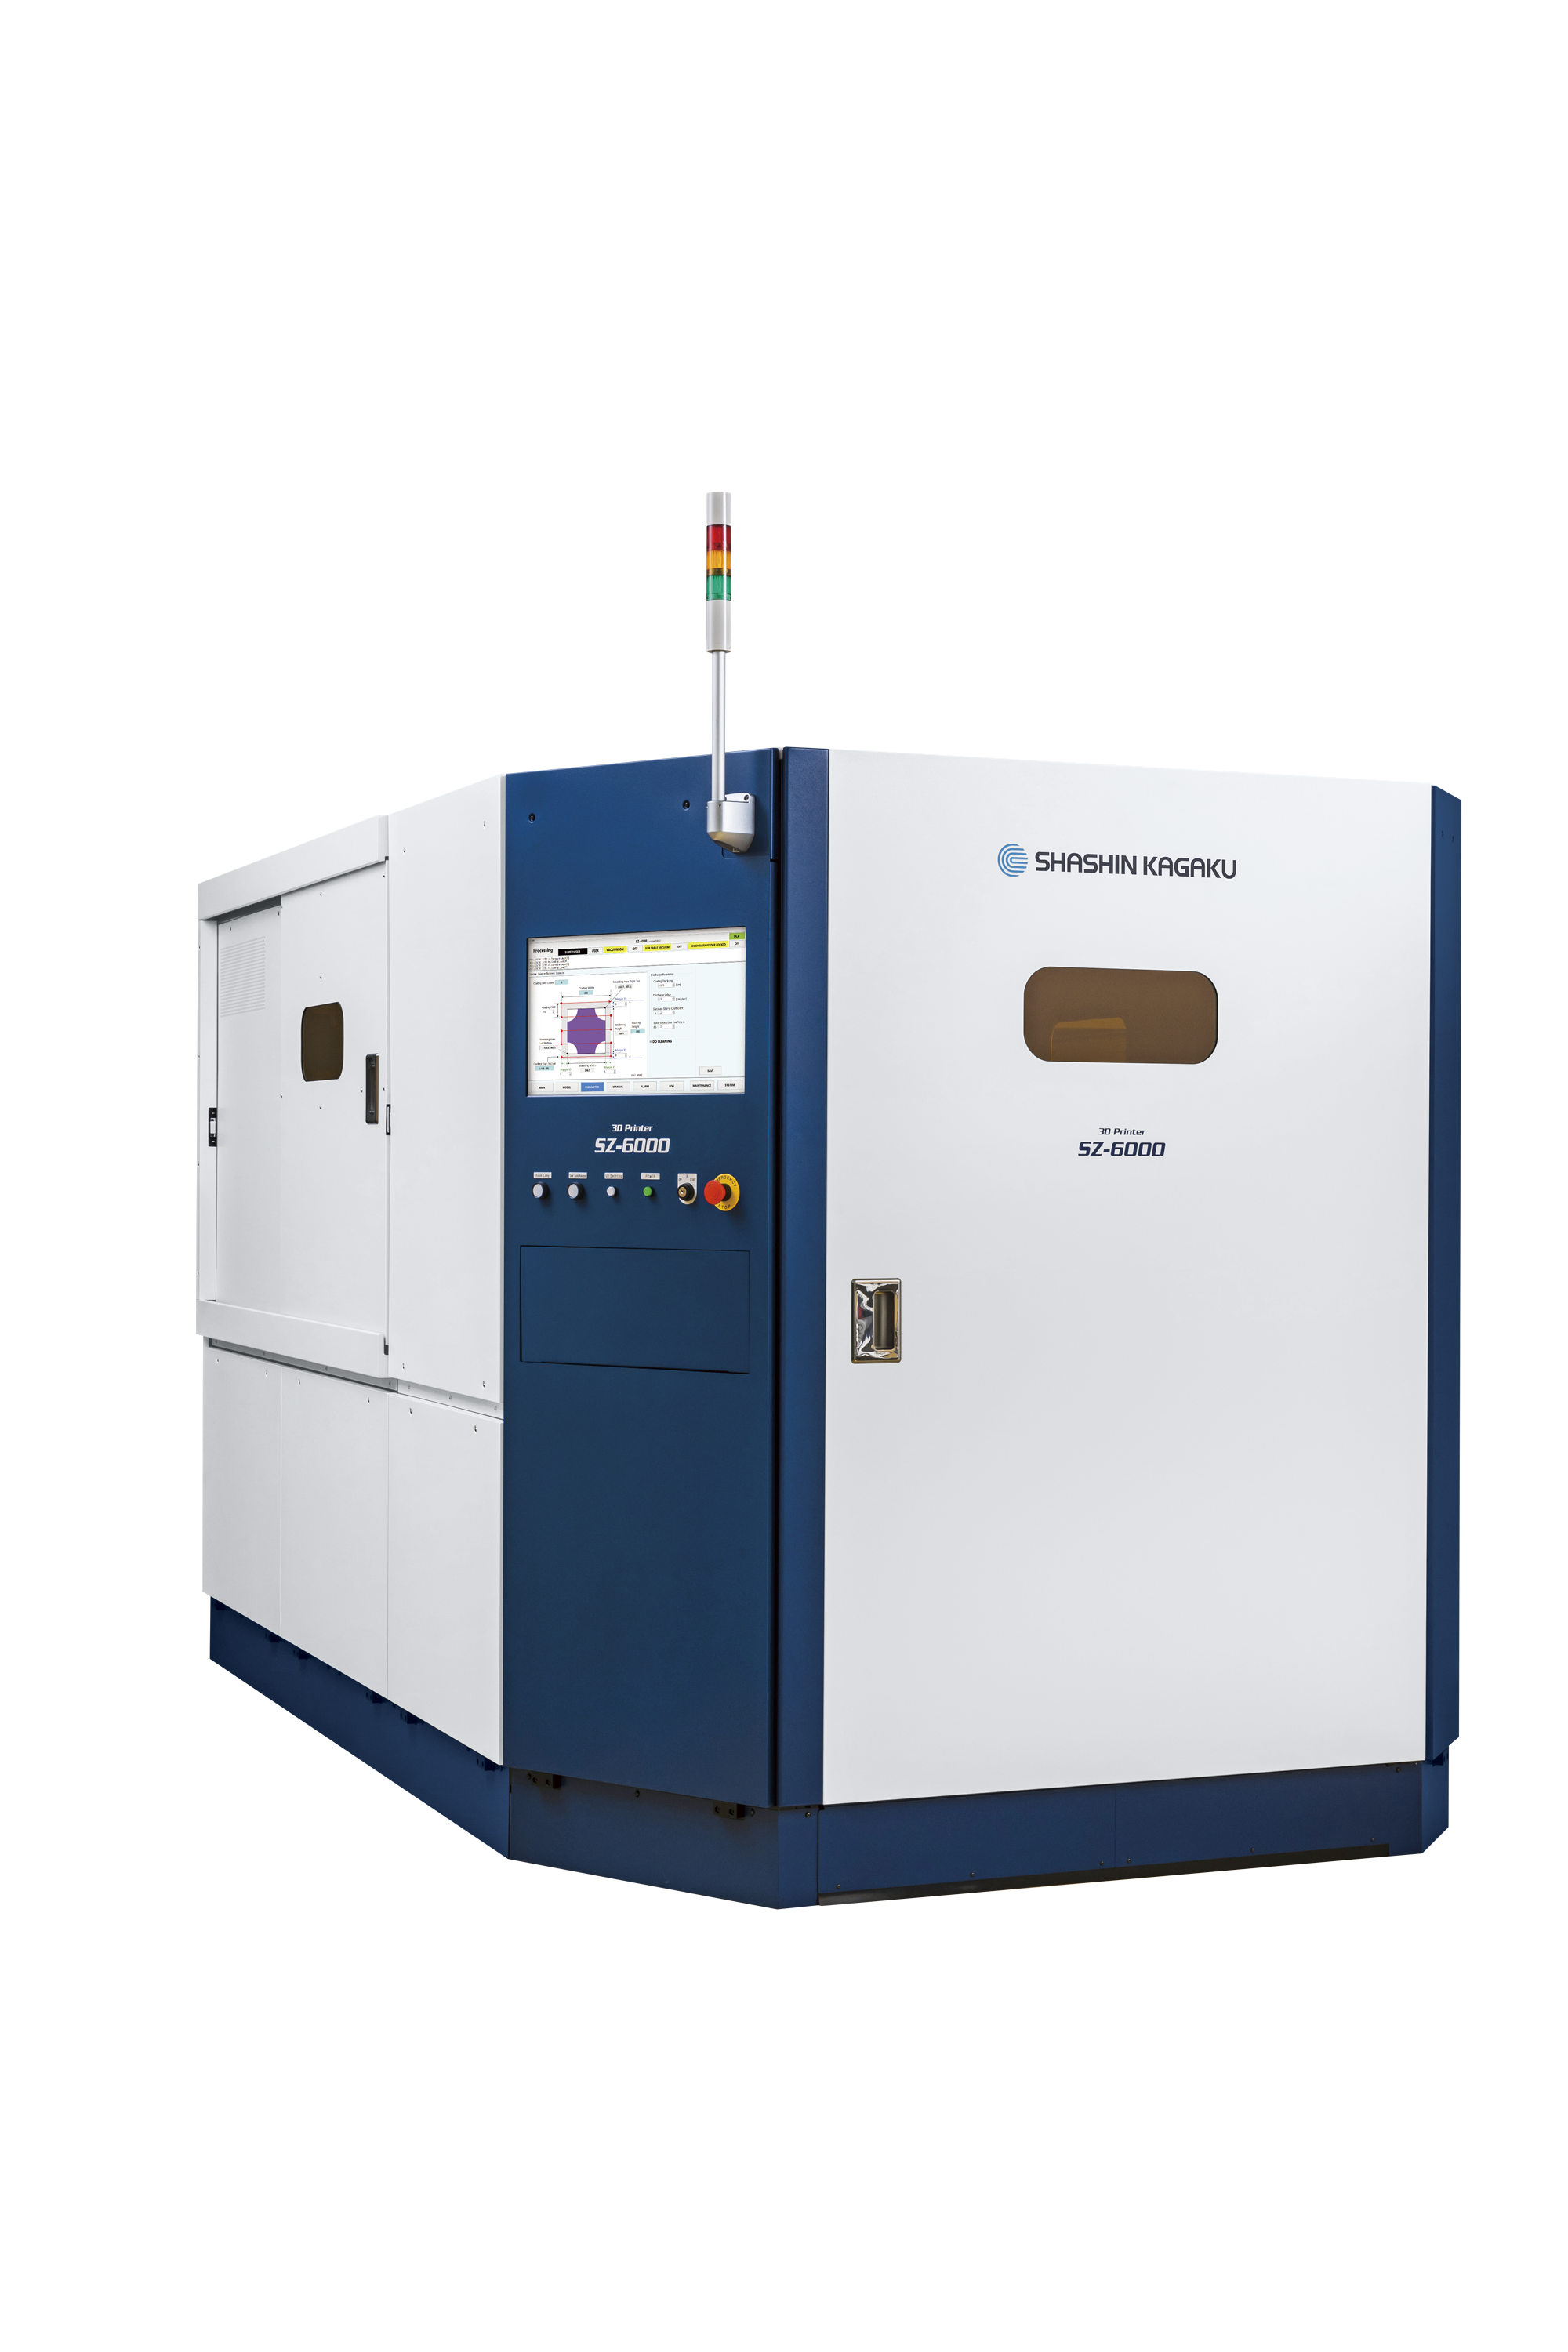 Shashin Kagaku is a Japanese manufacturer of AM systems that form high precision parts using a ceramics-based process turned to CC-Link IE TSN to add value to additive manufacturing operations. (© Shashin Kagaku)